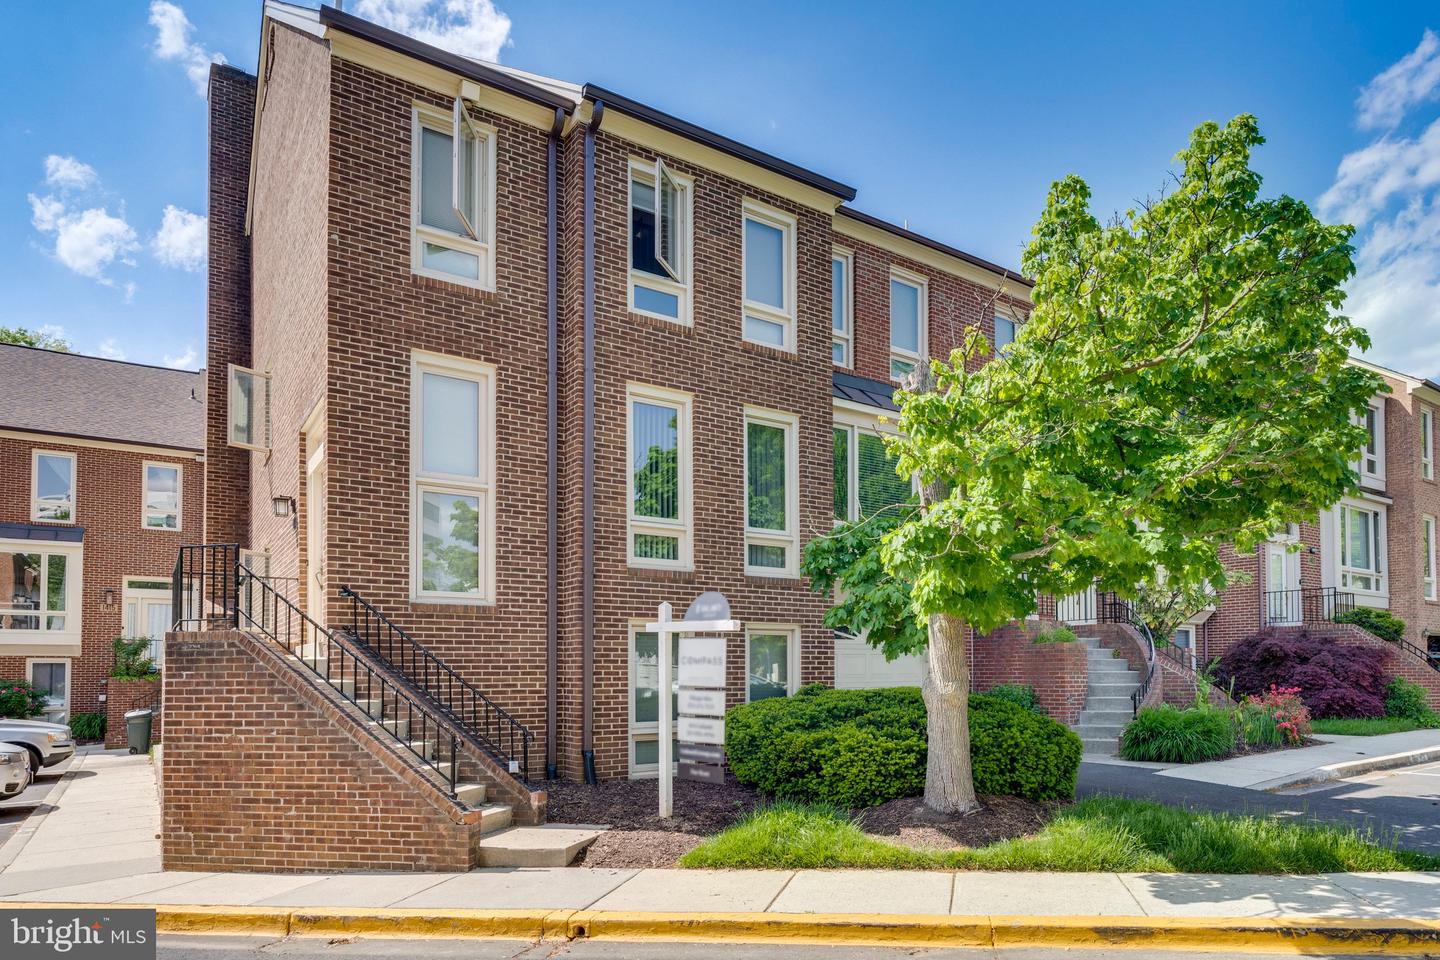 View Rockville, MD 20852 townhome